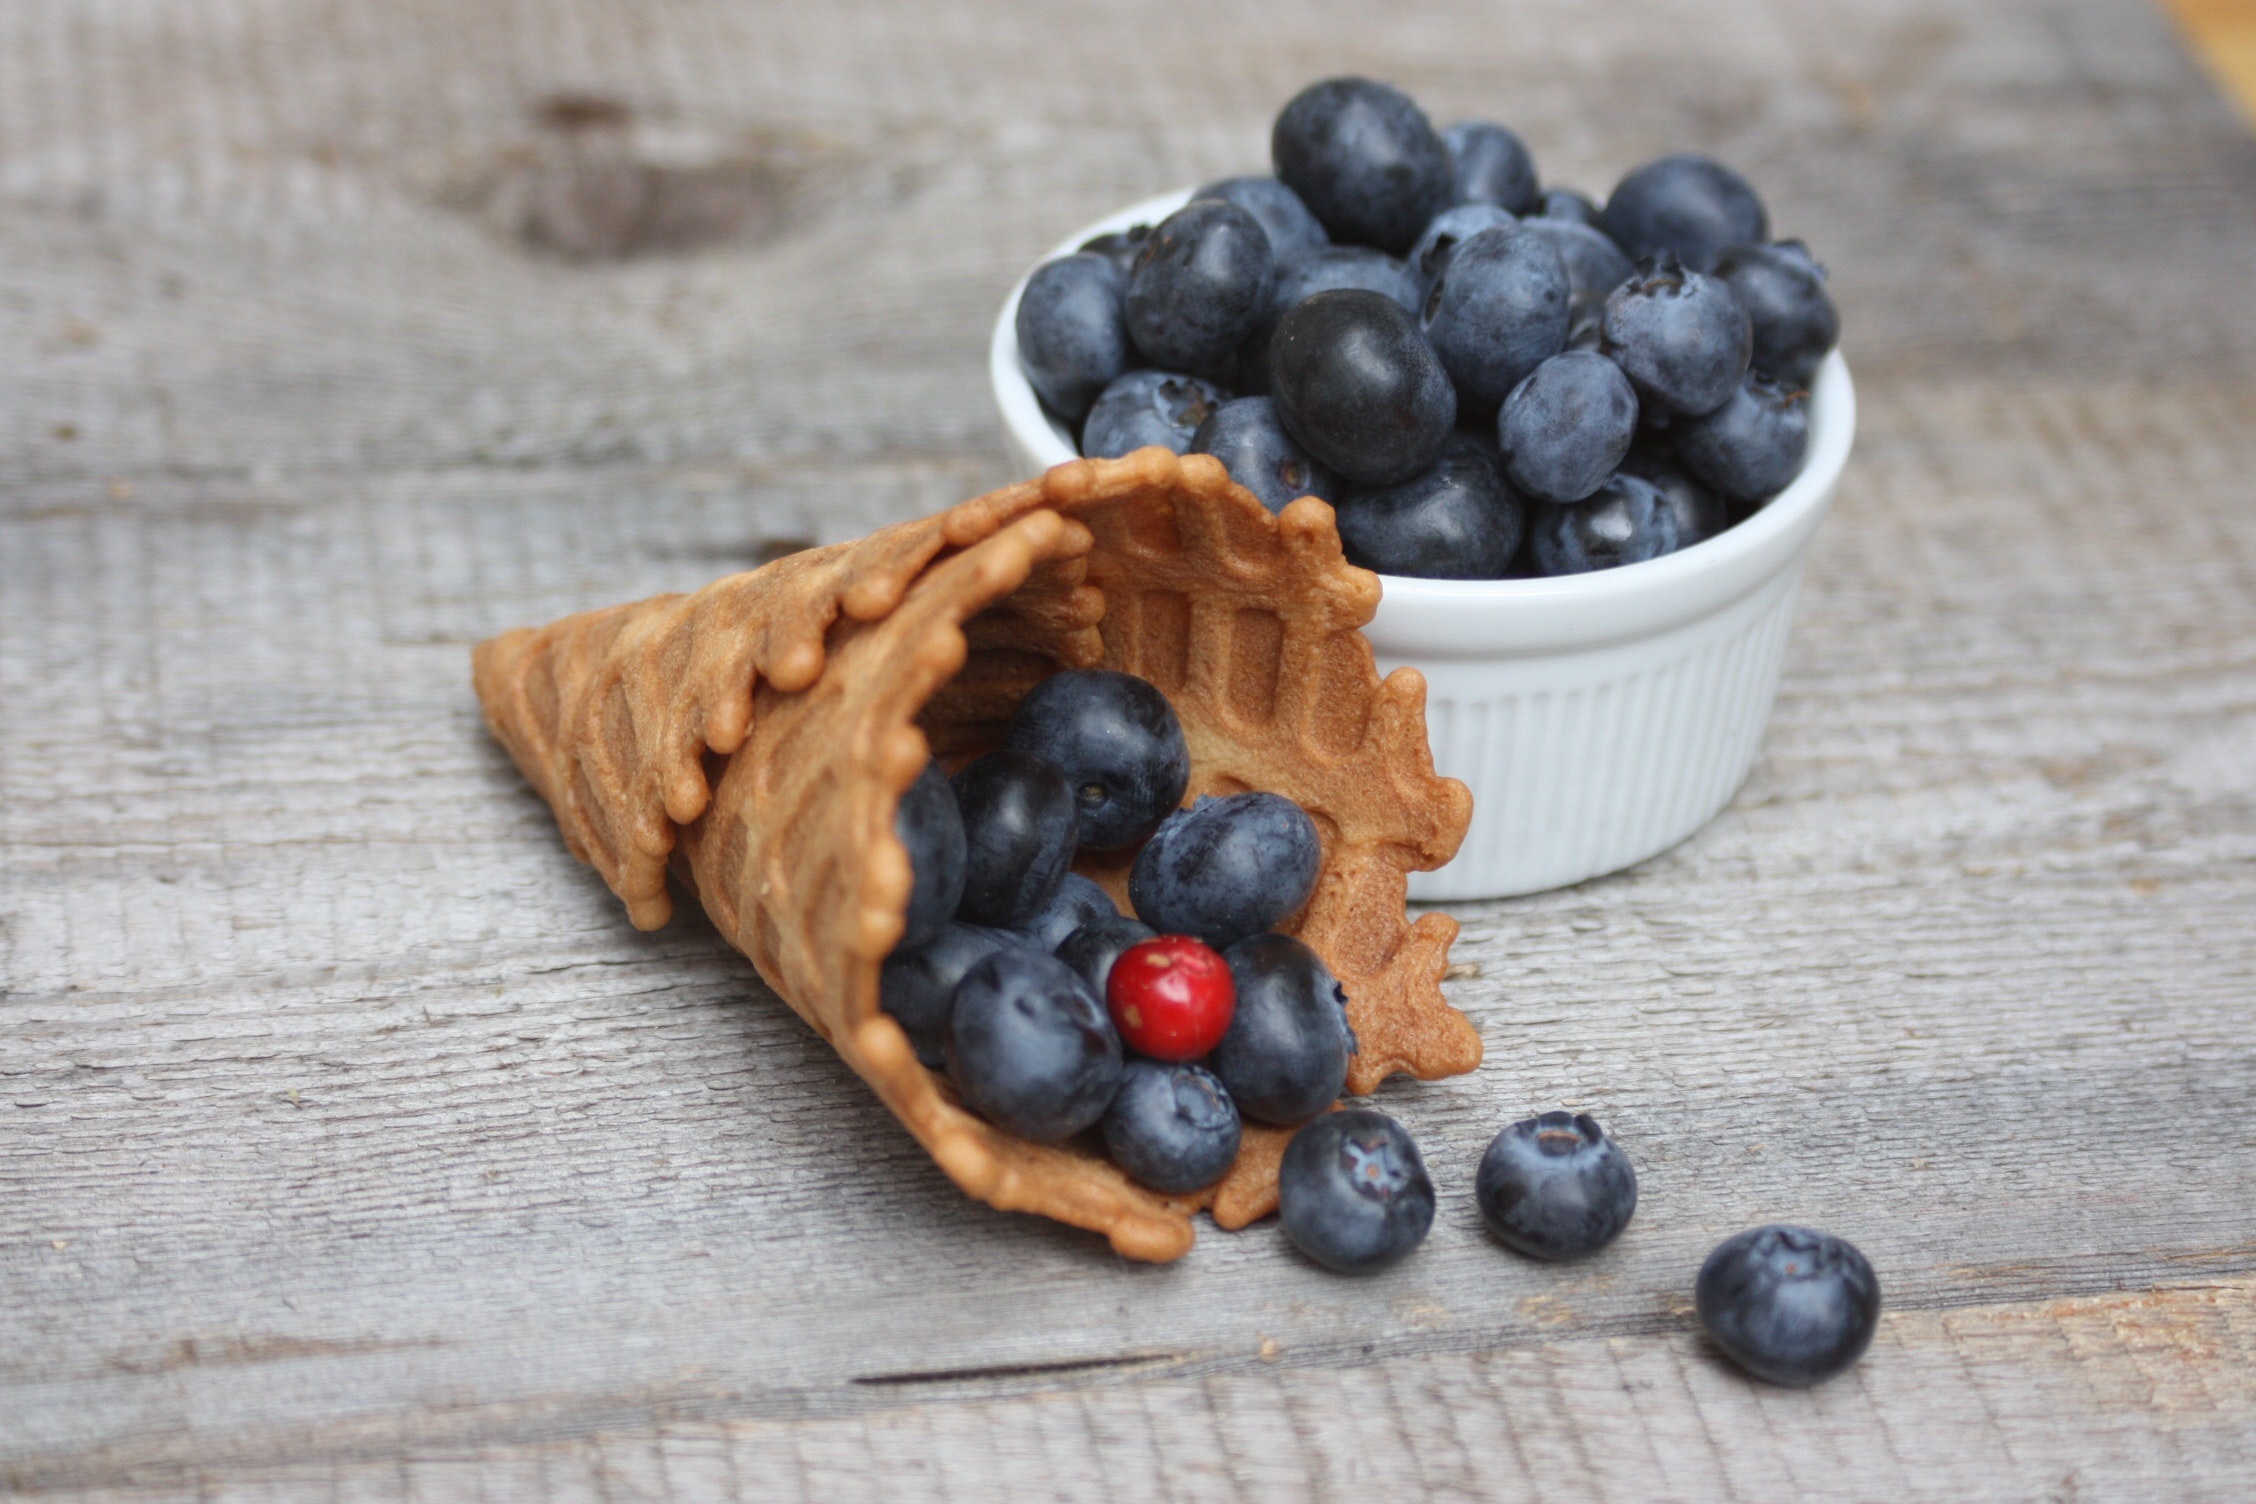 Blueberries for beauty. We suggest how to use them to create great cosmetics